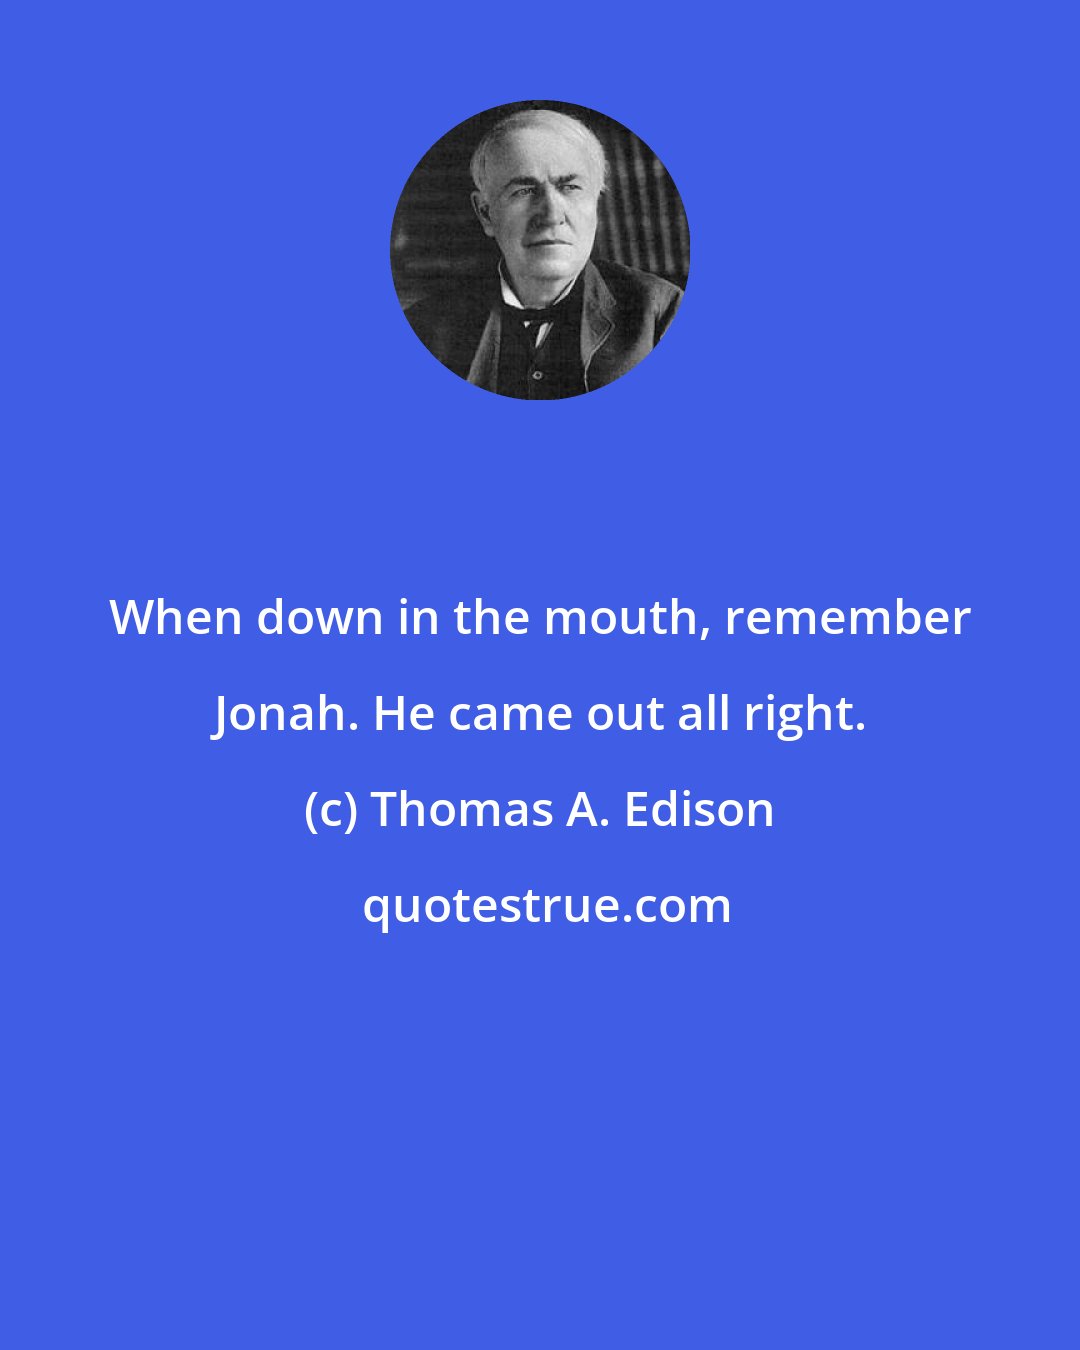 Thomas A. Edison: When down in the mouth, remember Jonah. He came out all right.